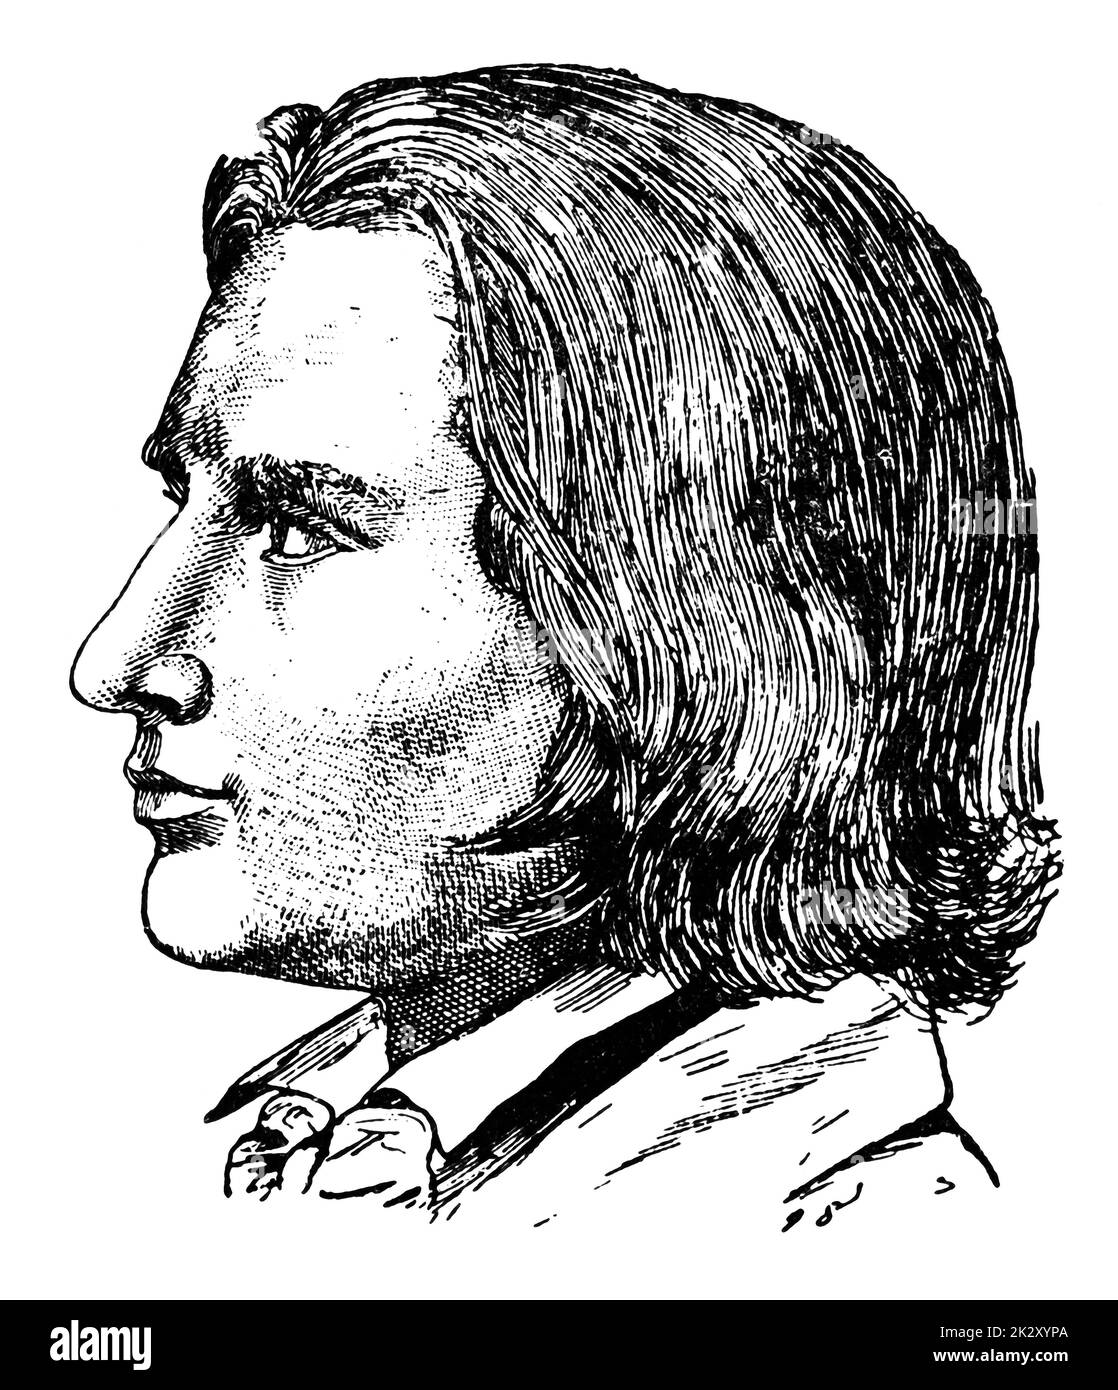 Portrait of Franz Liszt (at the age of 25) - a Hungarian composer, virtuoso pianist, conductor, music teacher, arranger, and organist of the Romantic era. Illustration of the 19th century. White background. Stock Photo